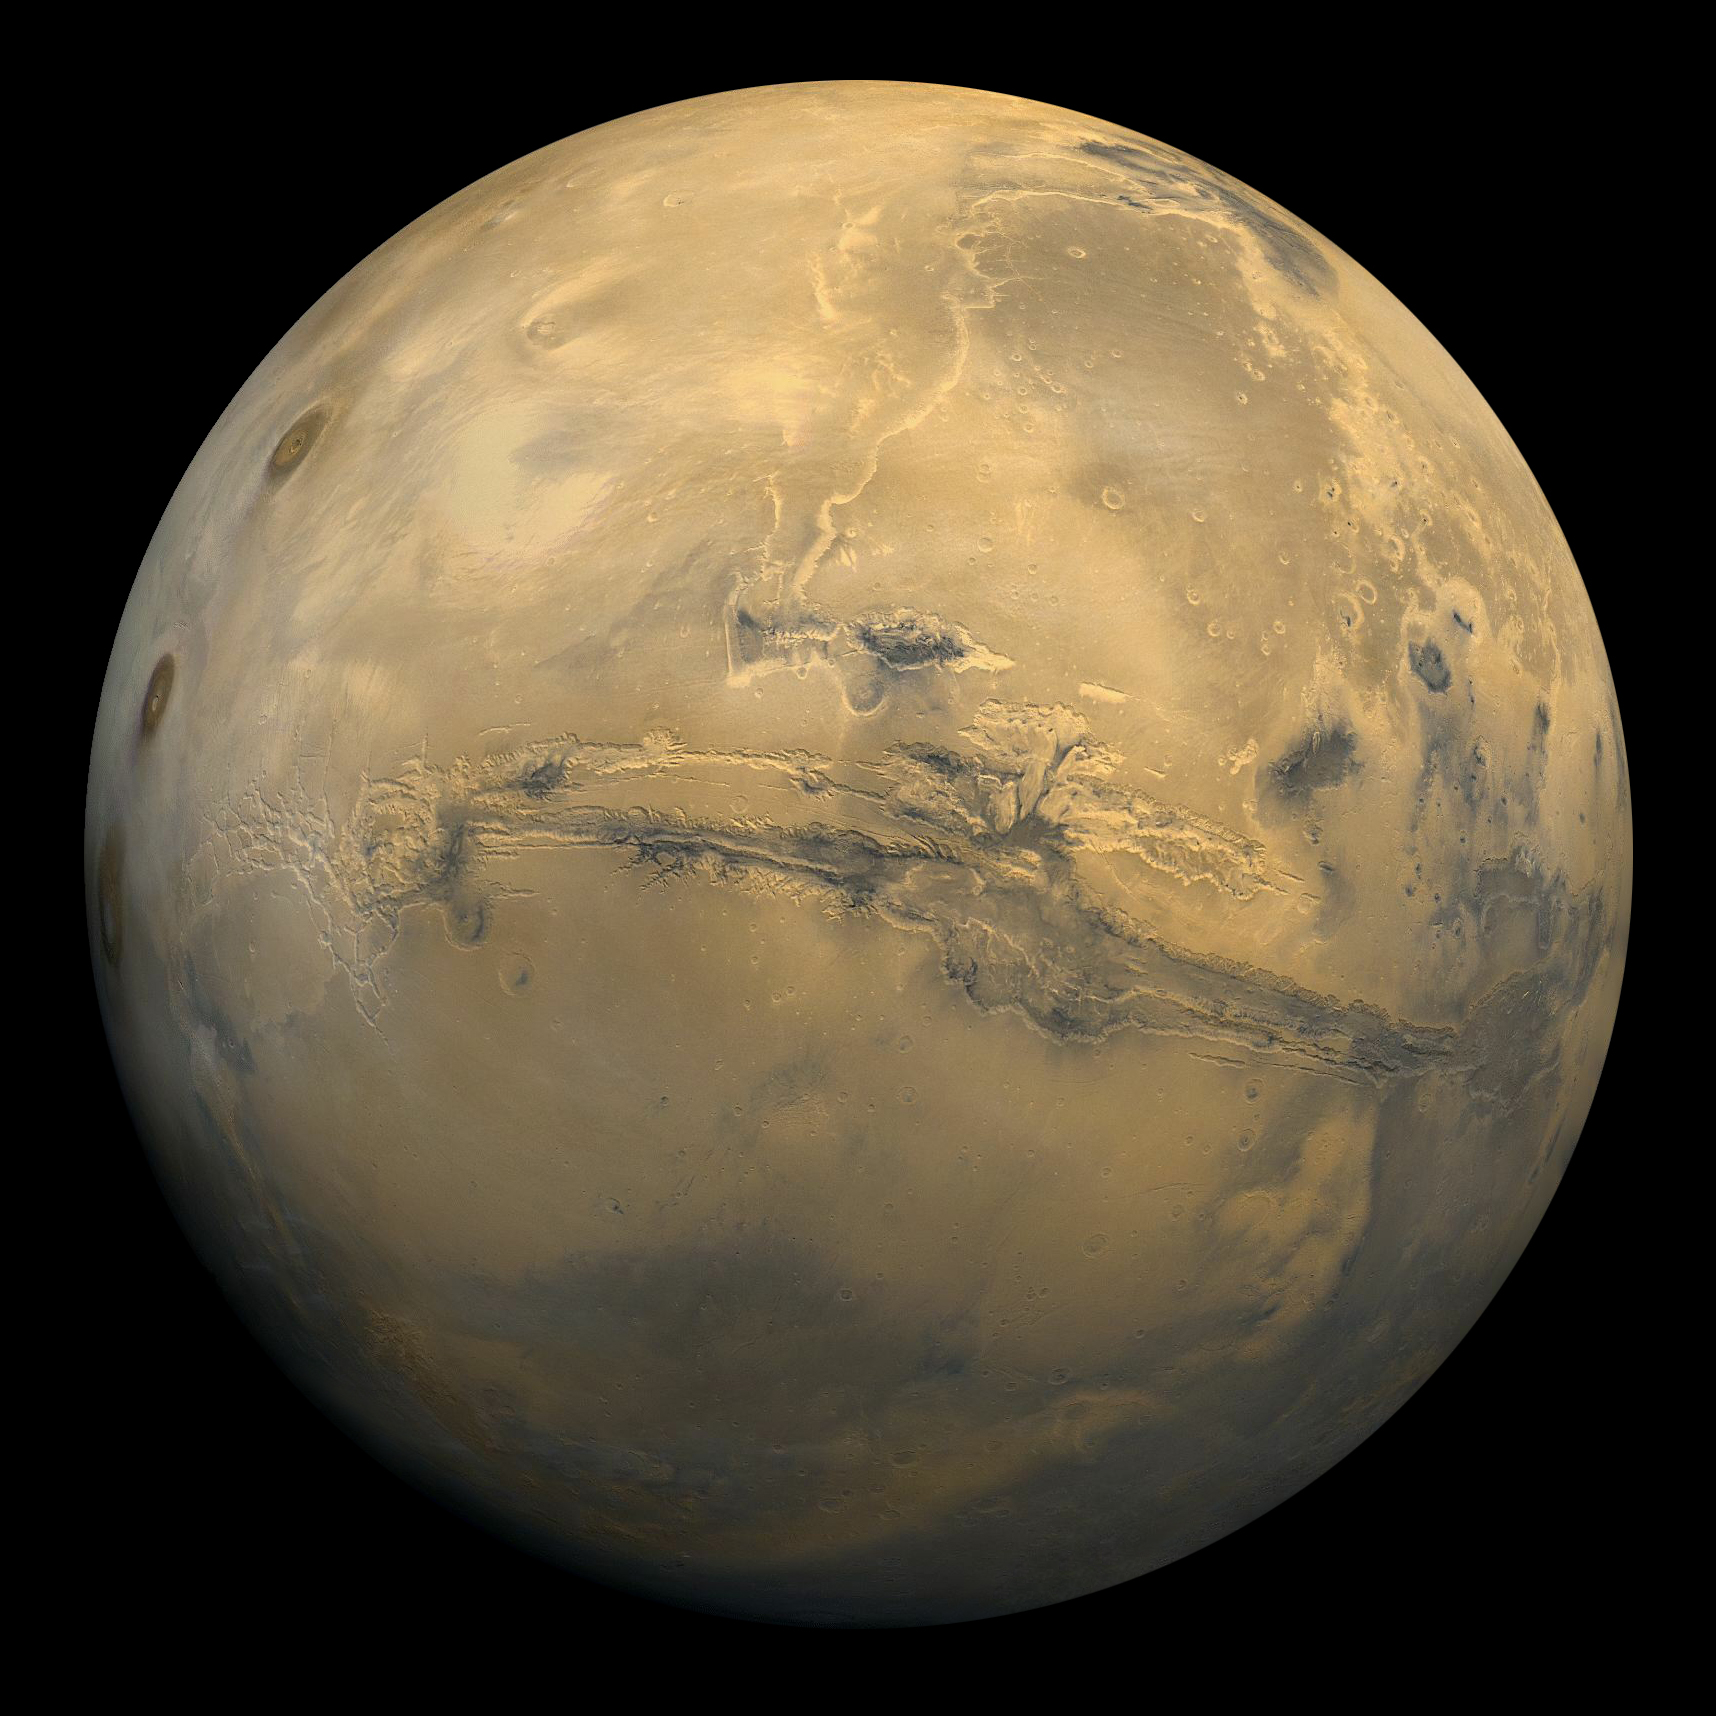 Image of the planet Mars